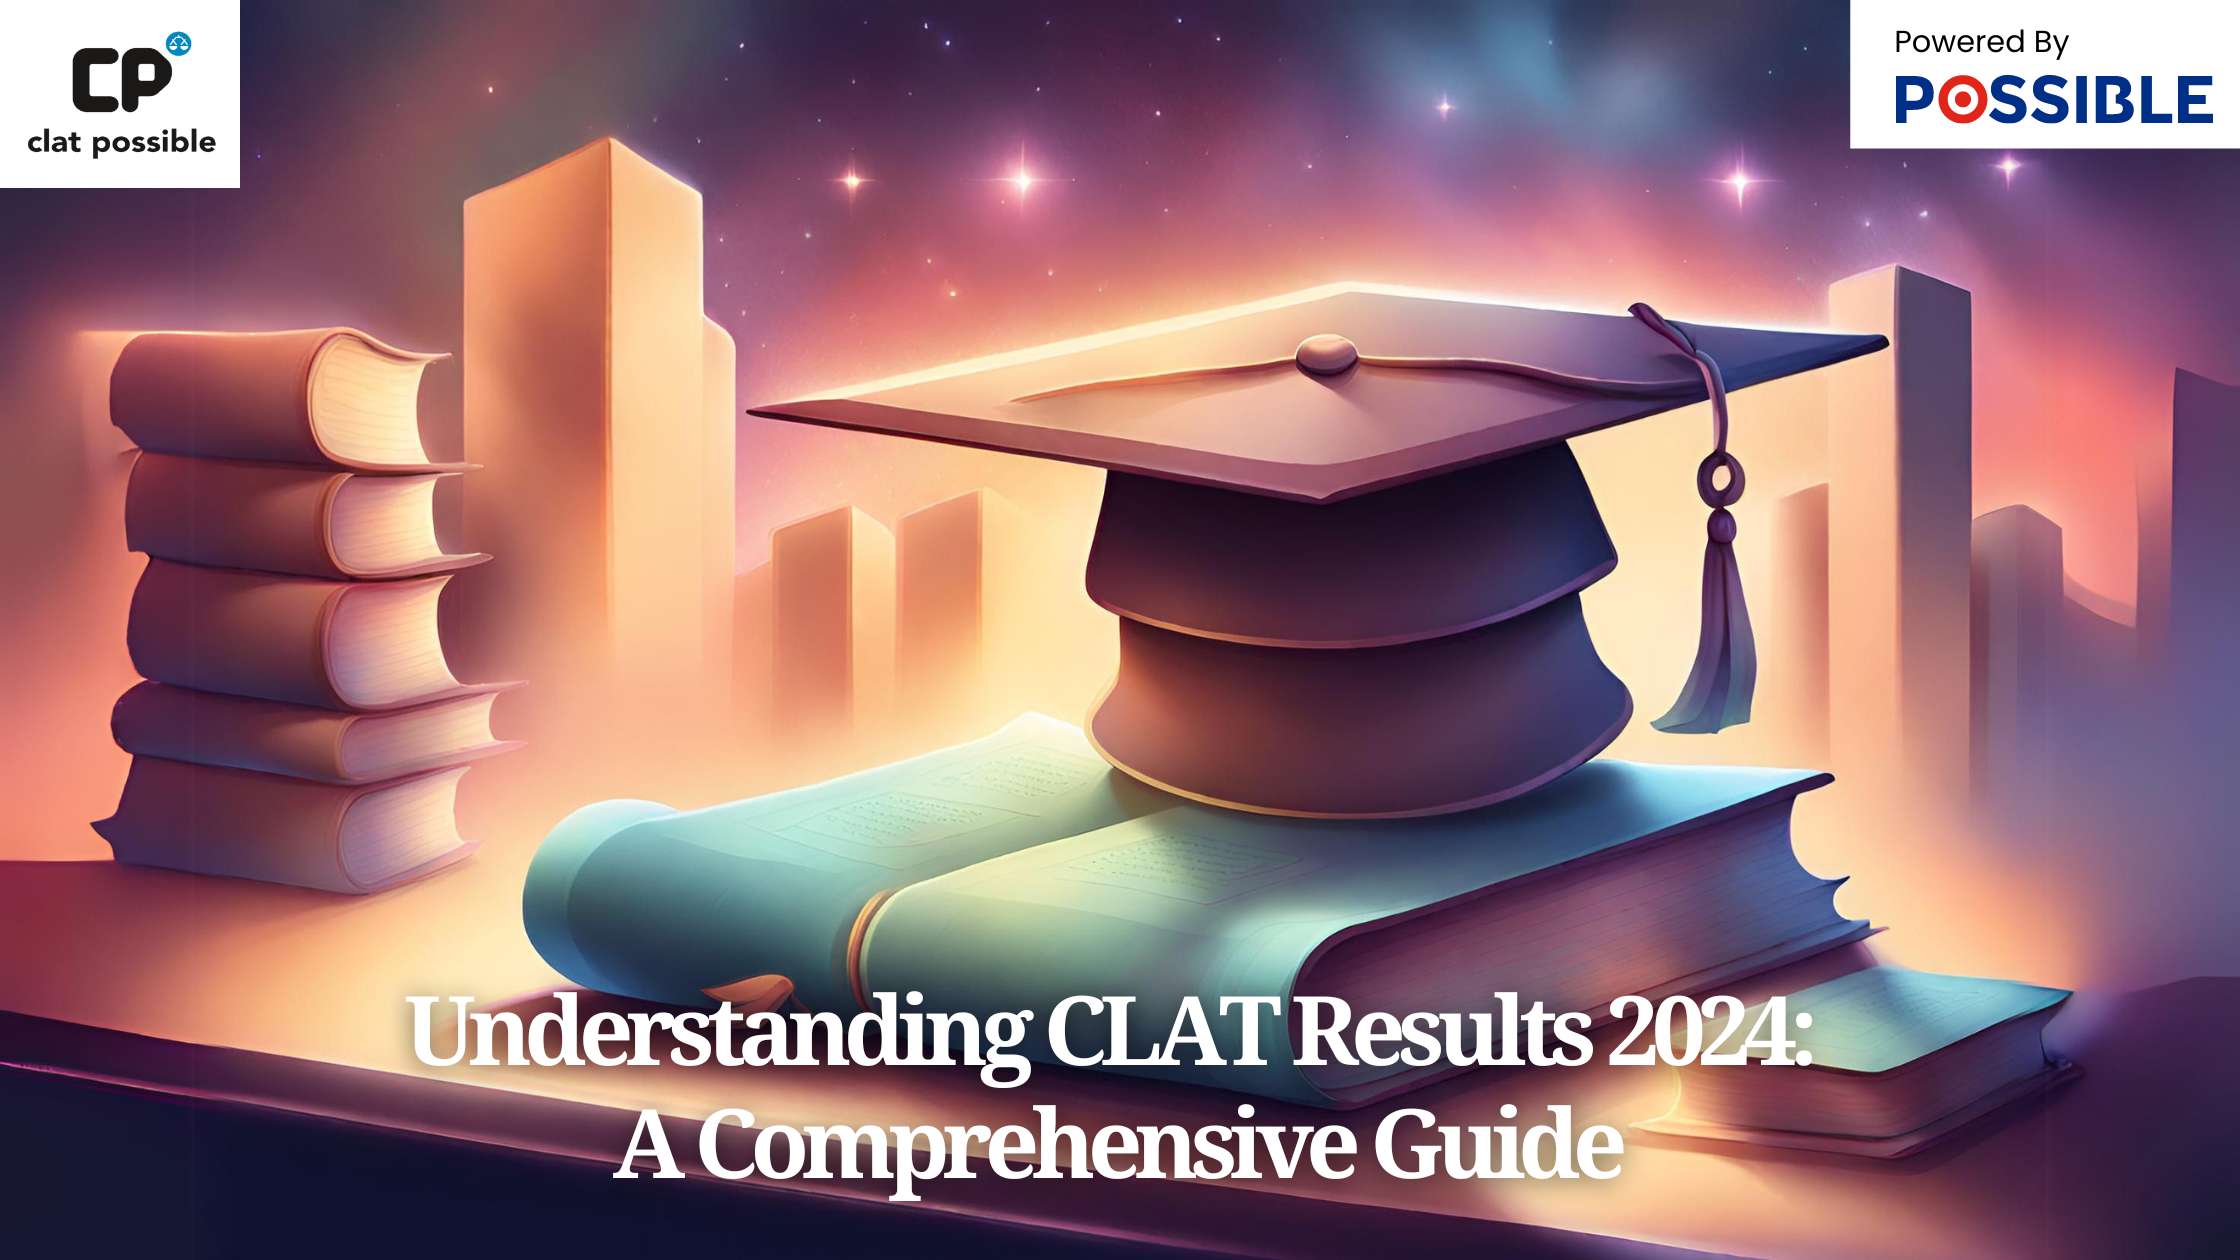 CLAT Results 2024